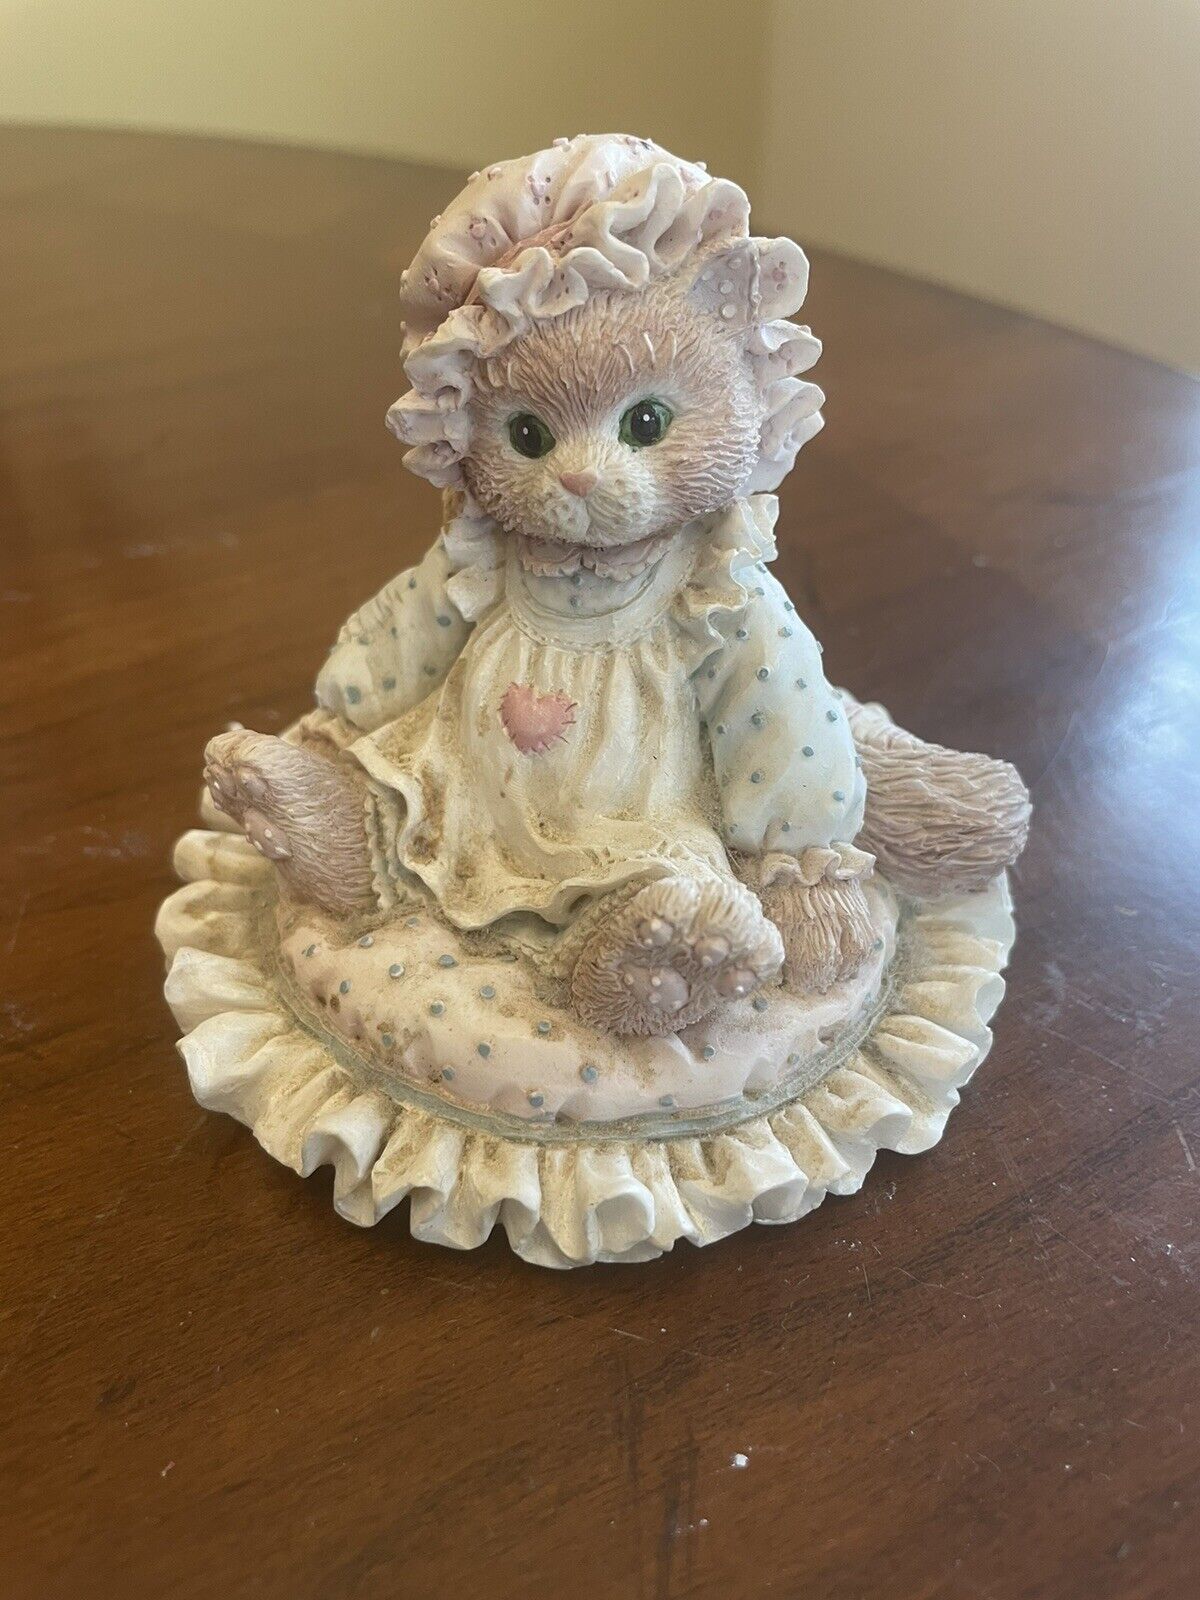 Enesco Calico Kitten “Just Thinking About You” Vtg Figurine 1992 Perfect 